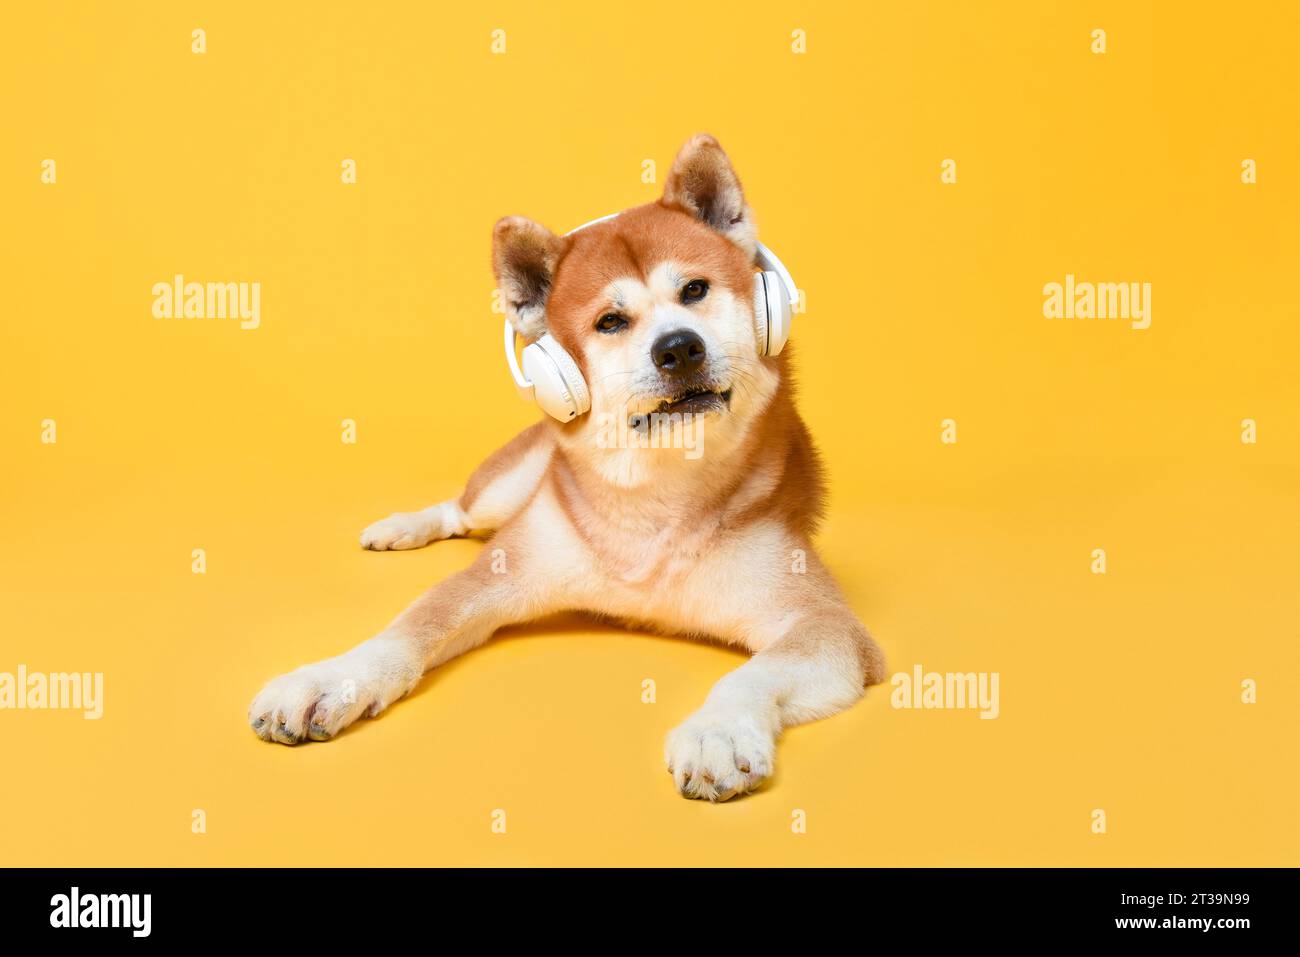 Cute Japanese Akita Inu dog lying and wearing headphones in yellow color studio isolated background Stock Photo